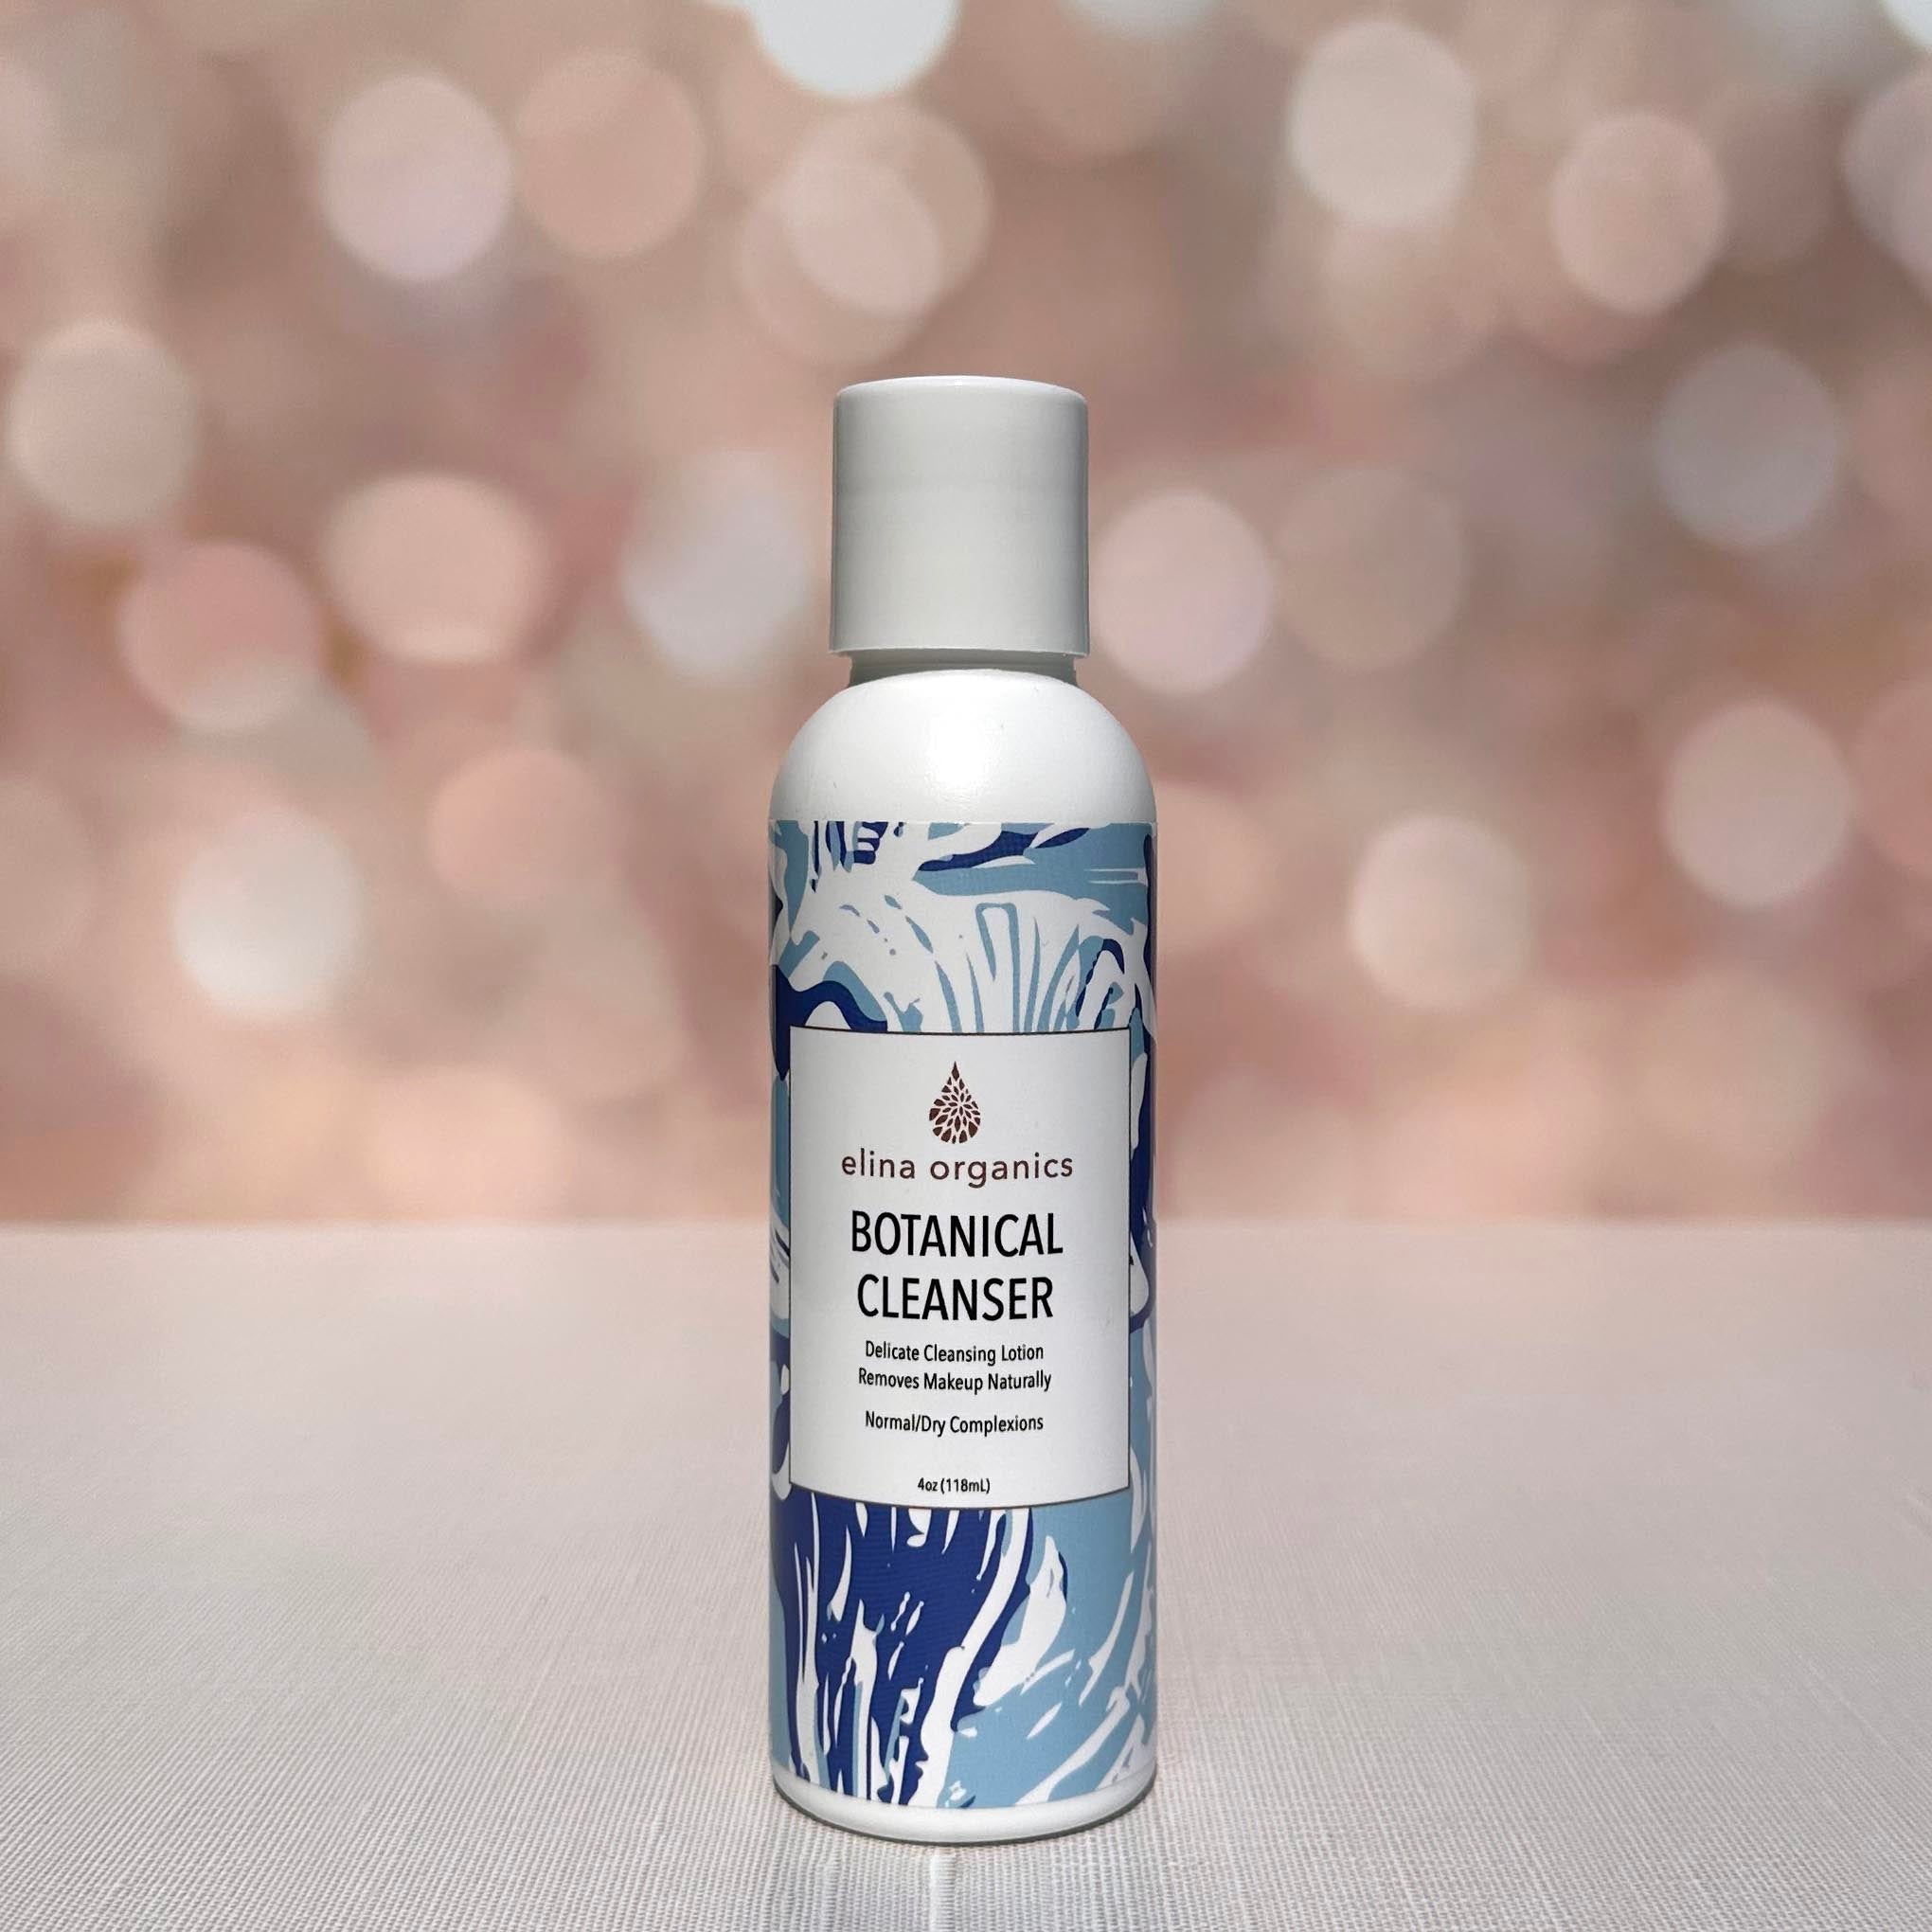 Elina Organics Botanical Cleanser in front of a sparkling background